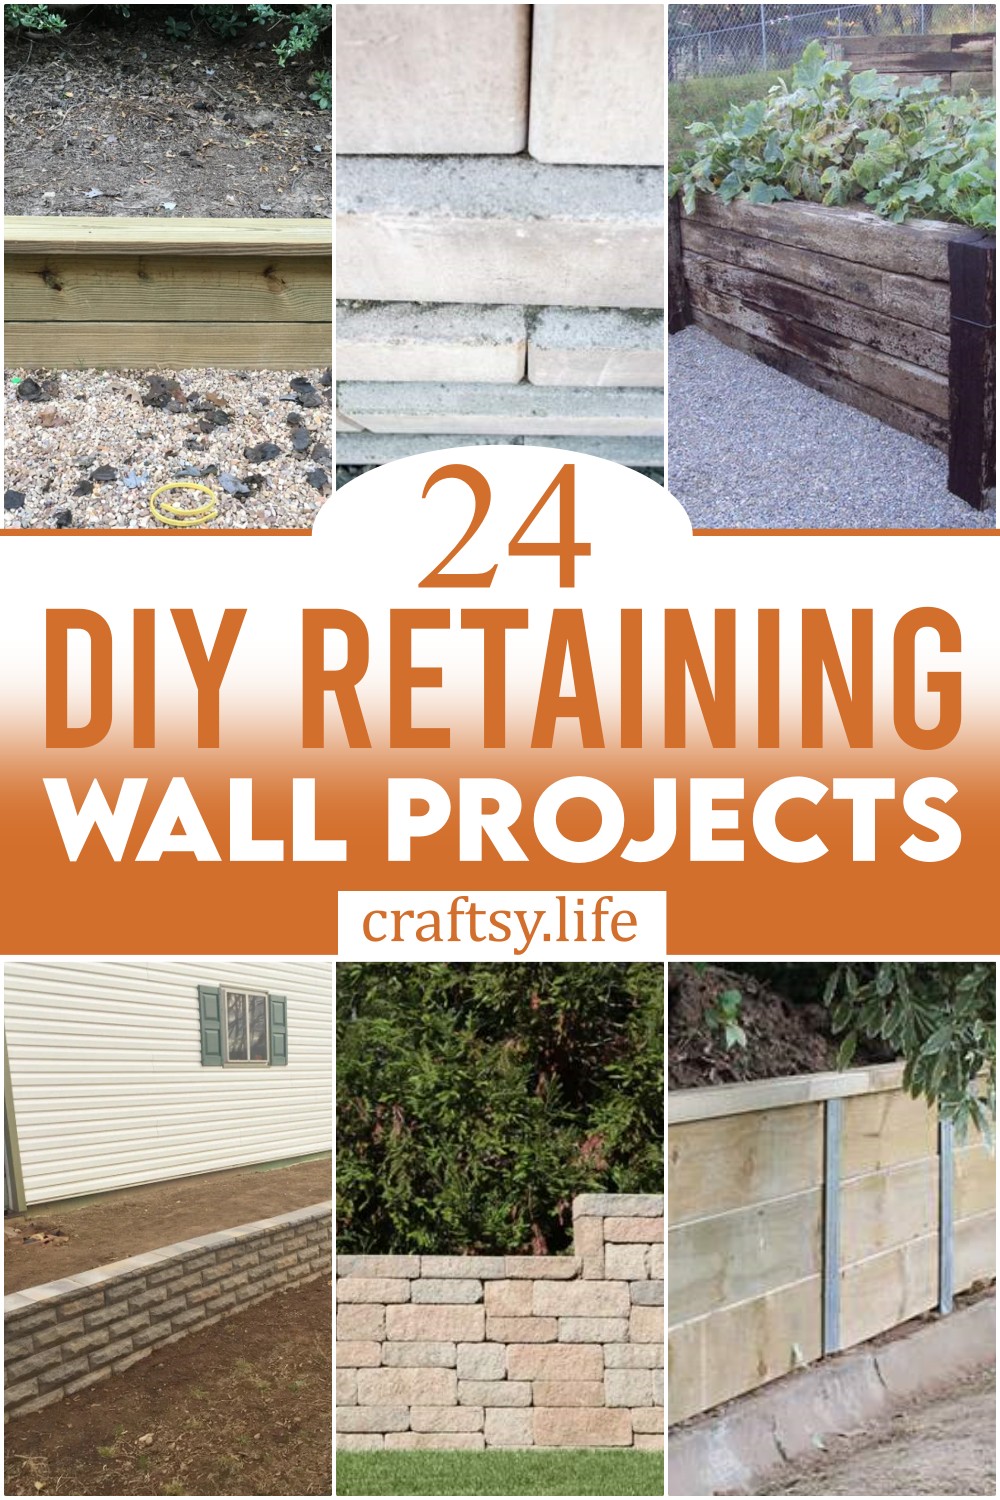 DIY Retaining Wall Projects 1